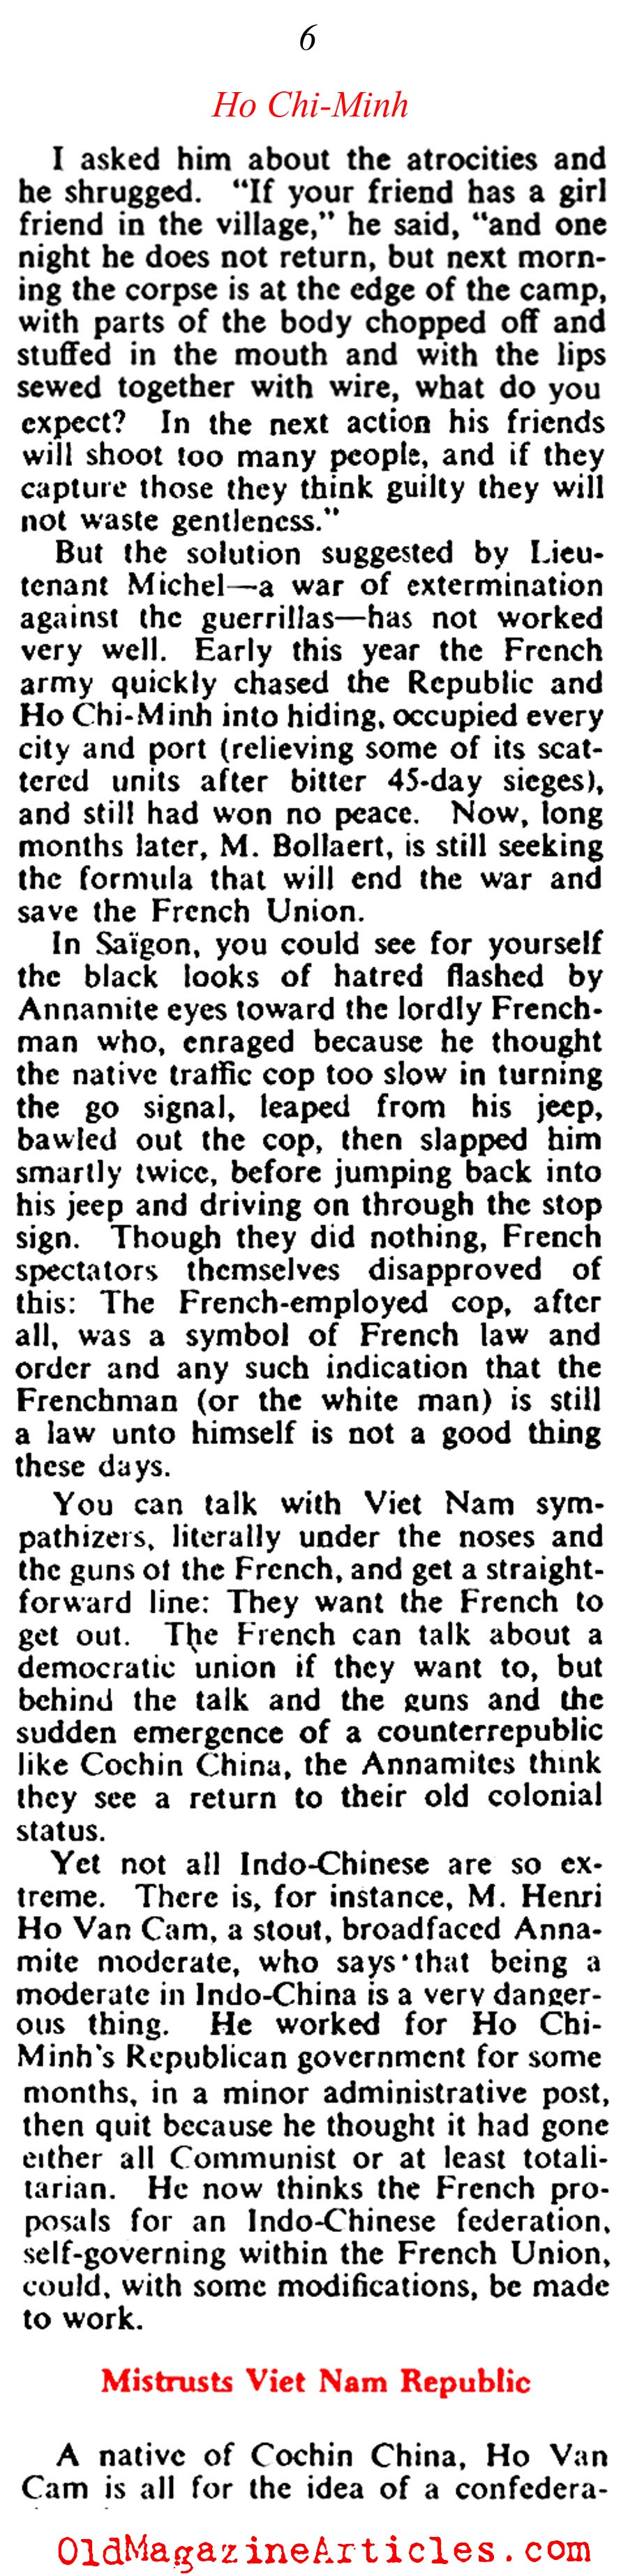 Ho Chi-Minh on the March... (Collier's Magazine, 1947)